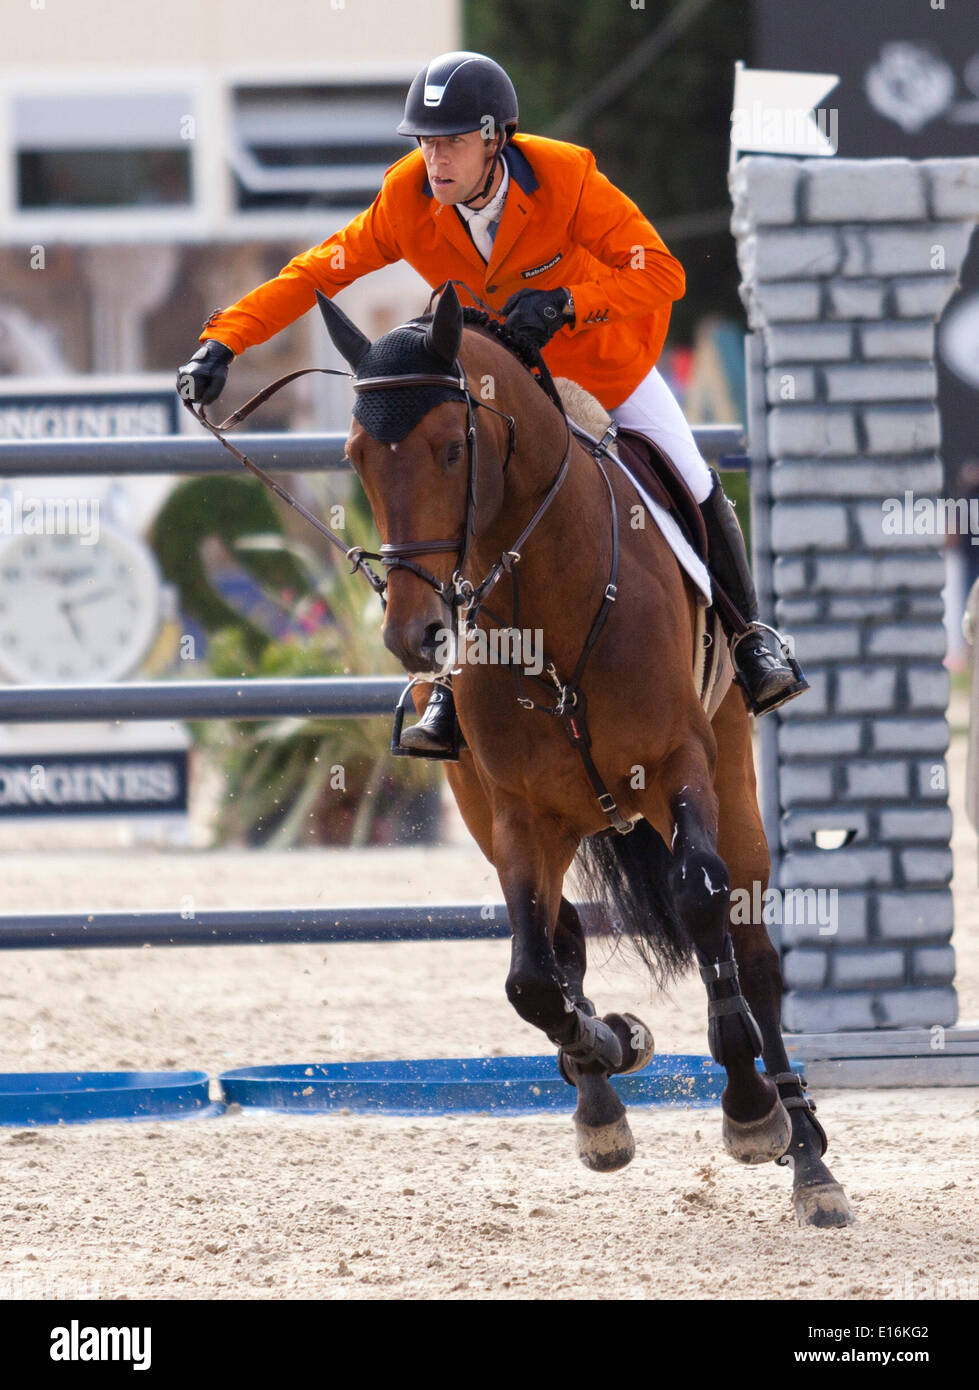 Furusiyya FEI Nations Cup Show jumping competition at Piazza di Siena. Maikel Van Der Vleuten for The Netherlands., Piazza di Siena, Rome, Italy. 5/23/14 Credit:  Stephen Bisgrove/Alamy Live News Stock Photo